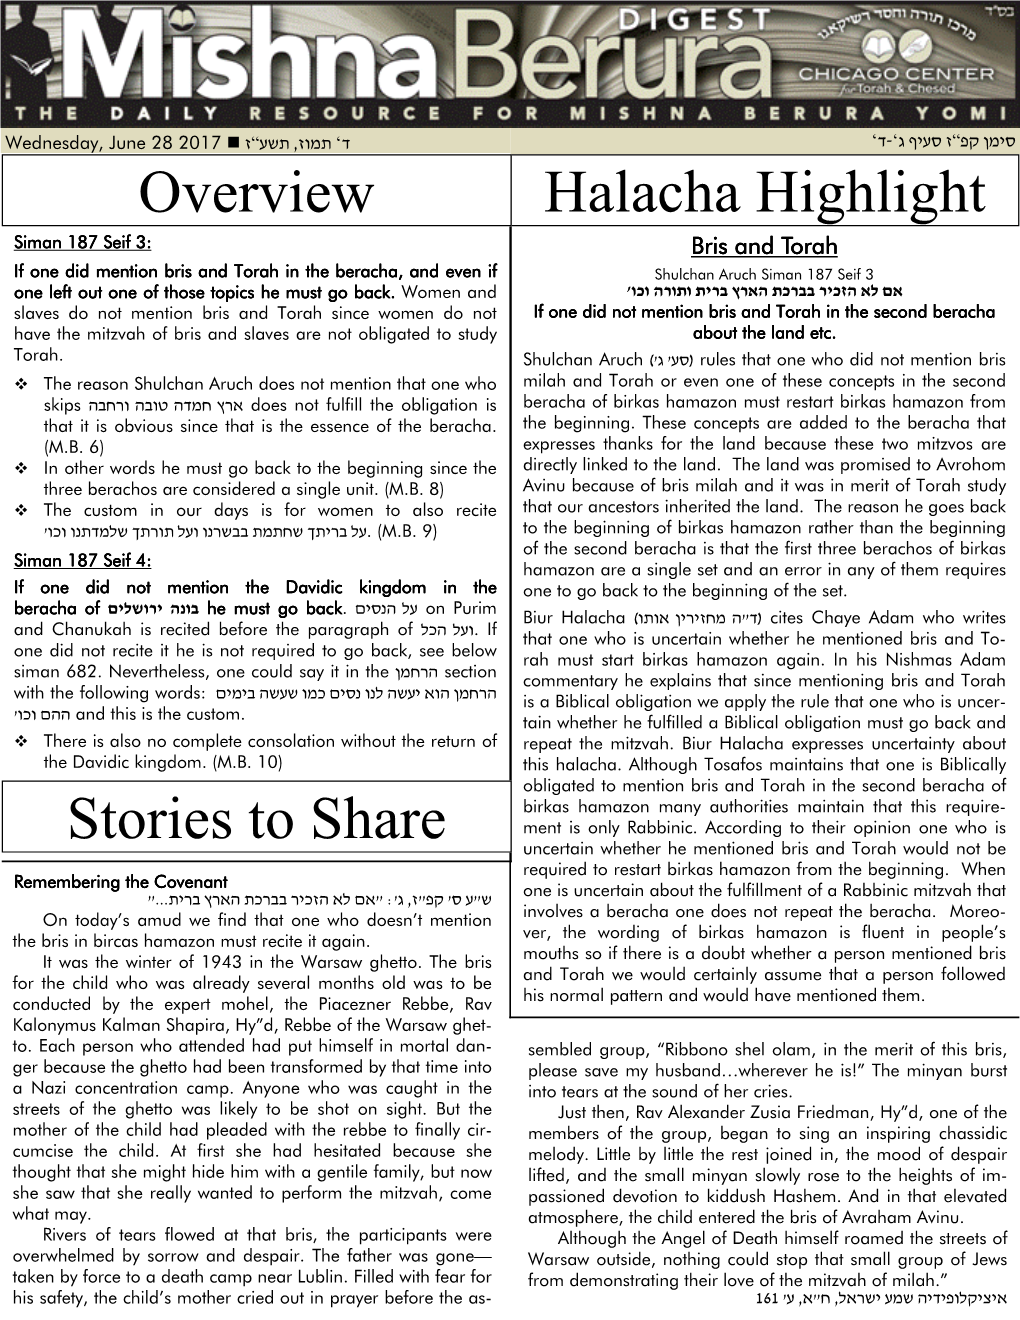 Halacha Highlight Overview Stories to Share